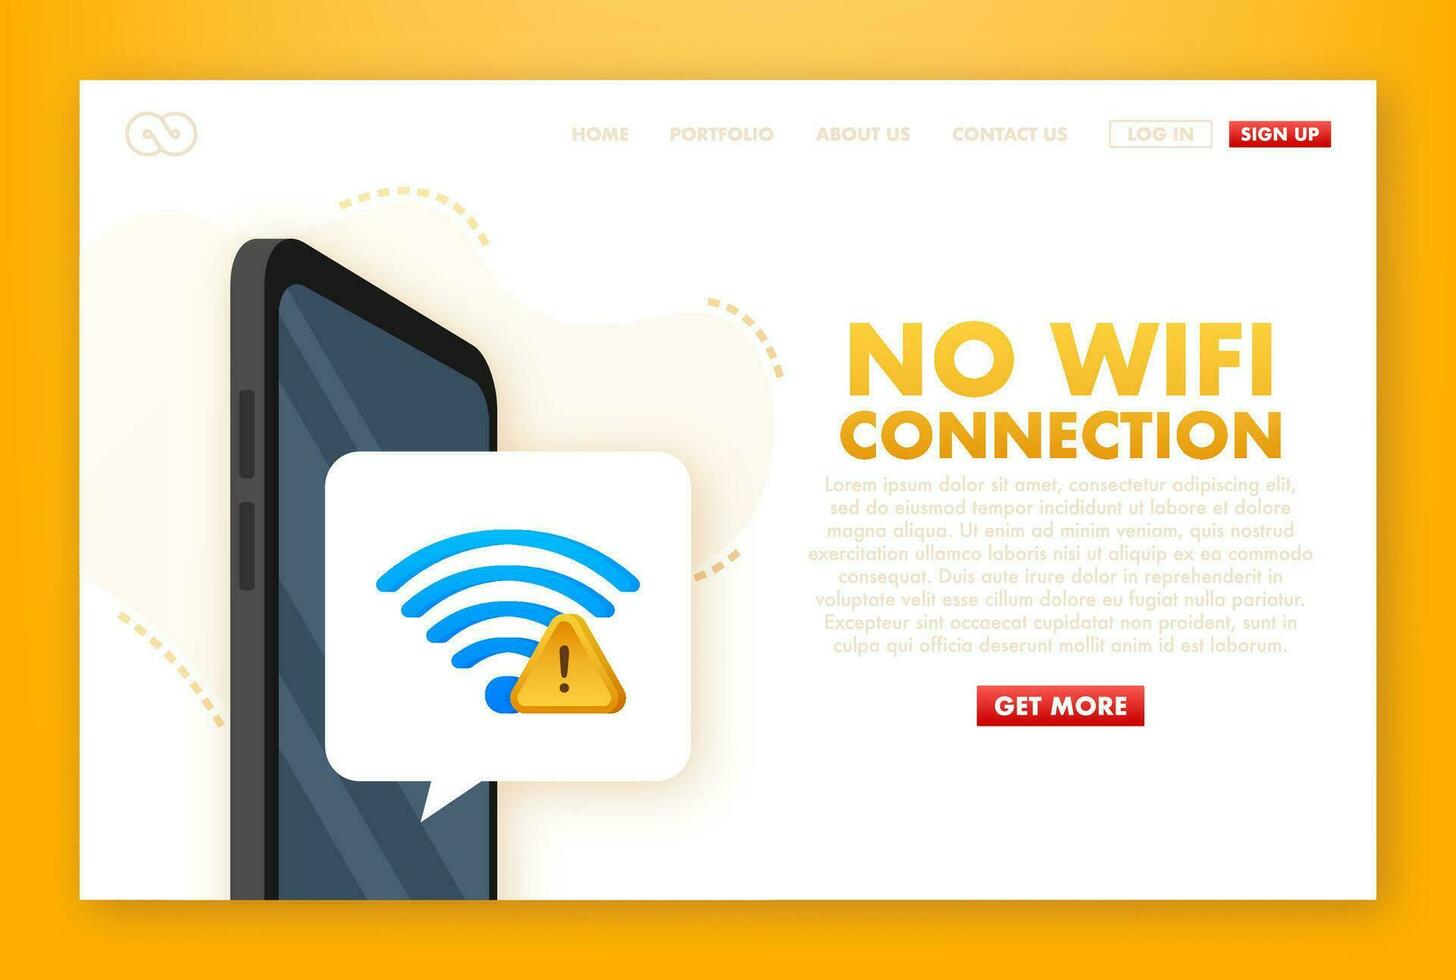 No internet connection found on smartphone. Lost Wireless Connection. No wifi. Vector stock illustration.